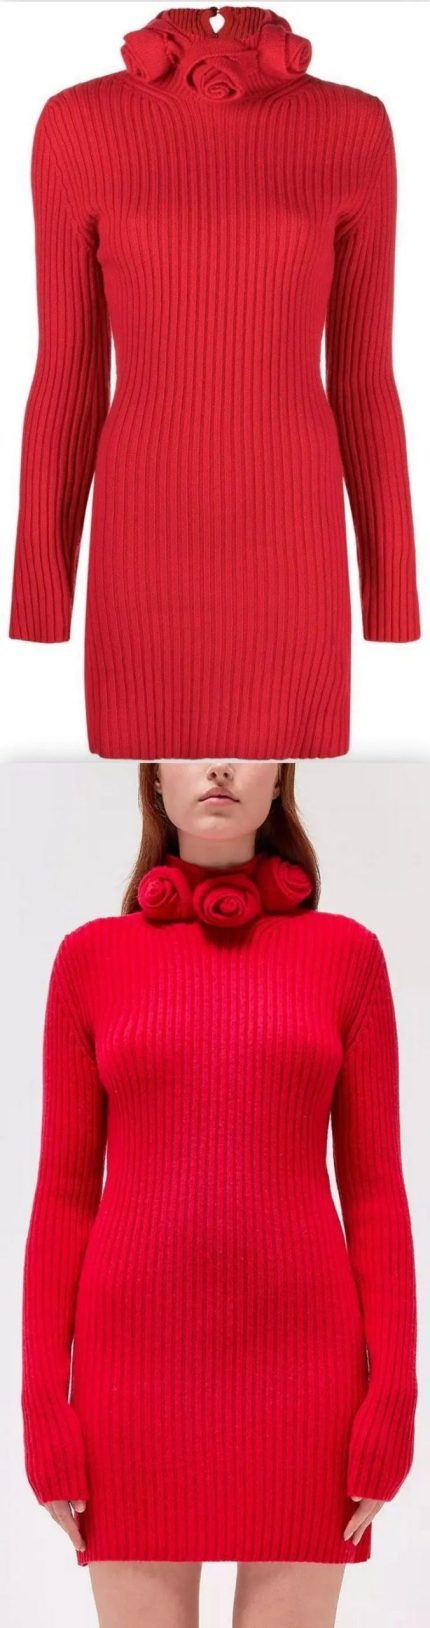 Knitted Mini Dress with 3D Roses, Red Women's Designer Fashions